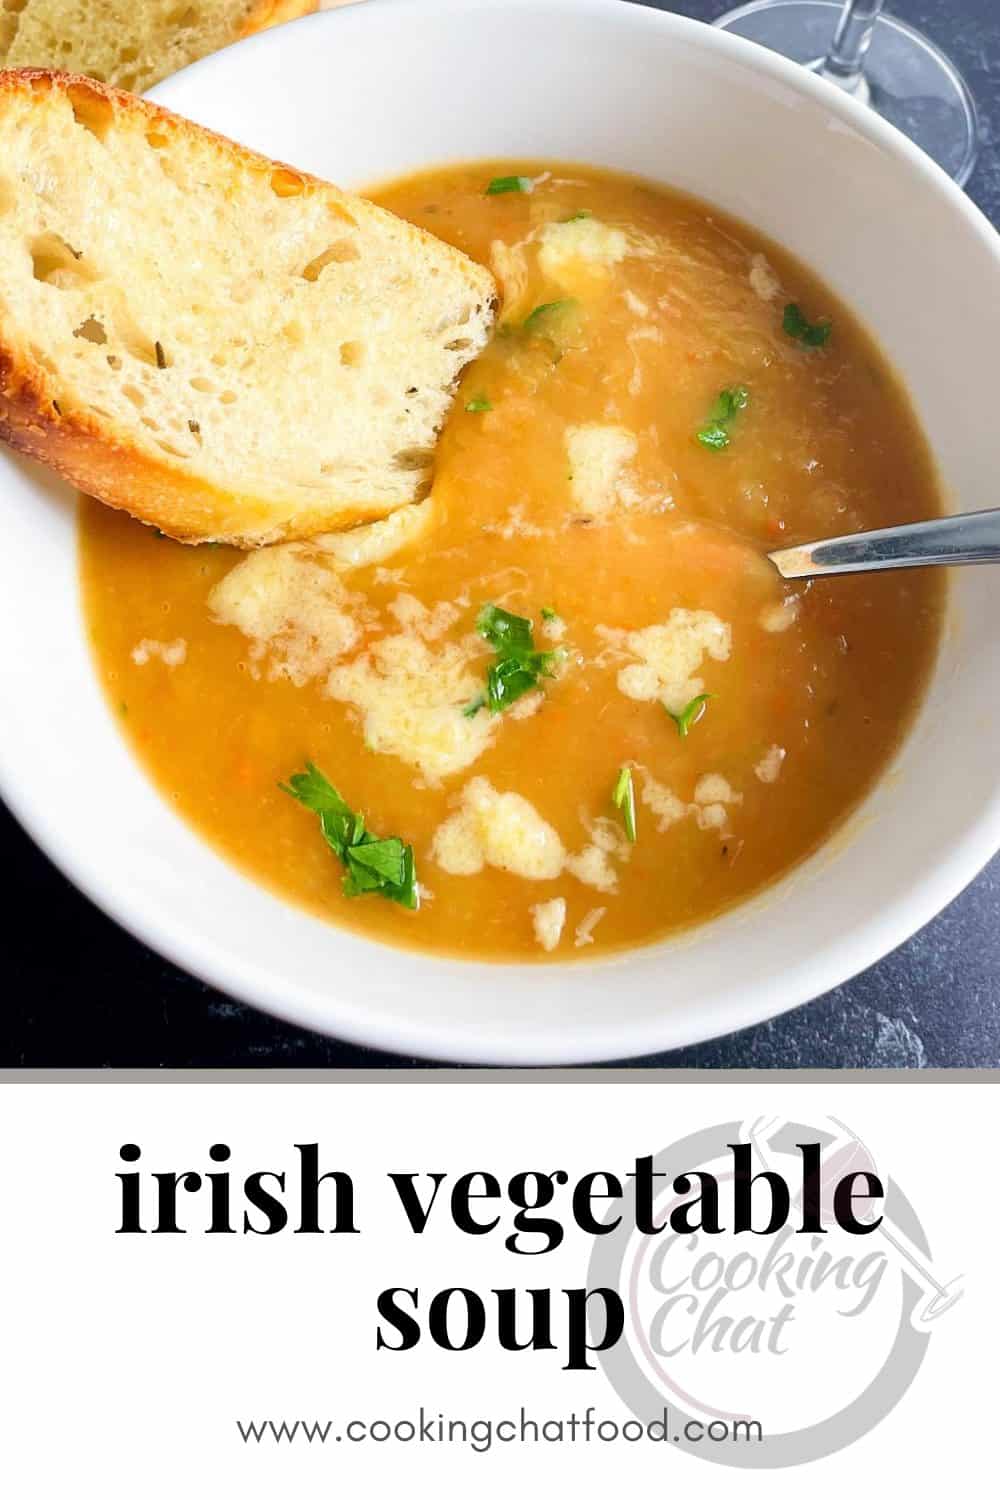 Irish Vegetable Soup in a white bowl, served with toasted bread. Text underneath the image with the recipe title and Cooking Chat logo.